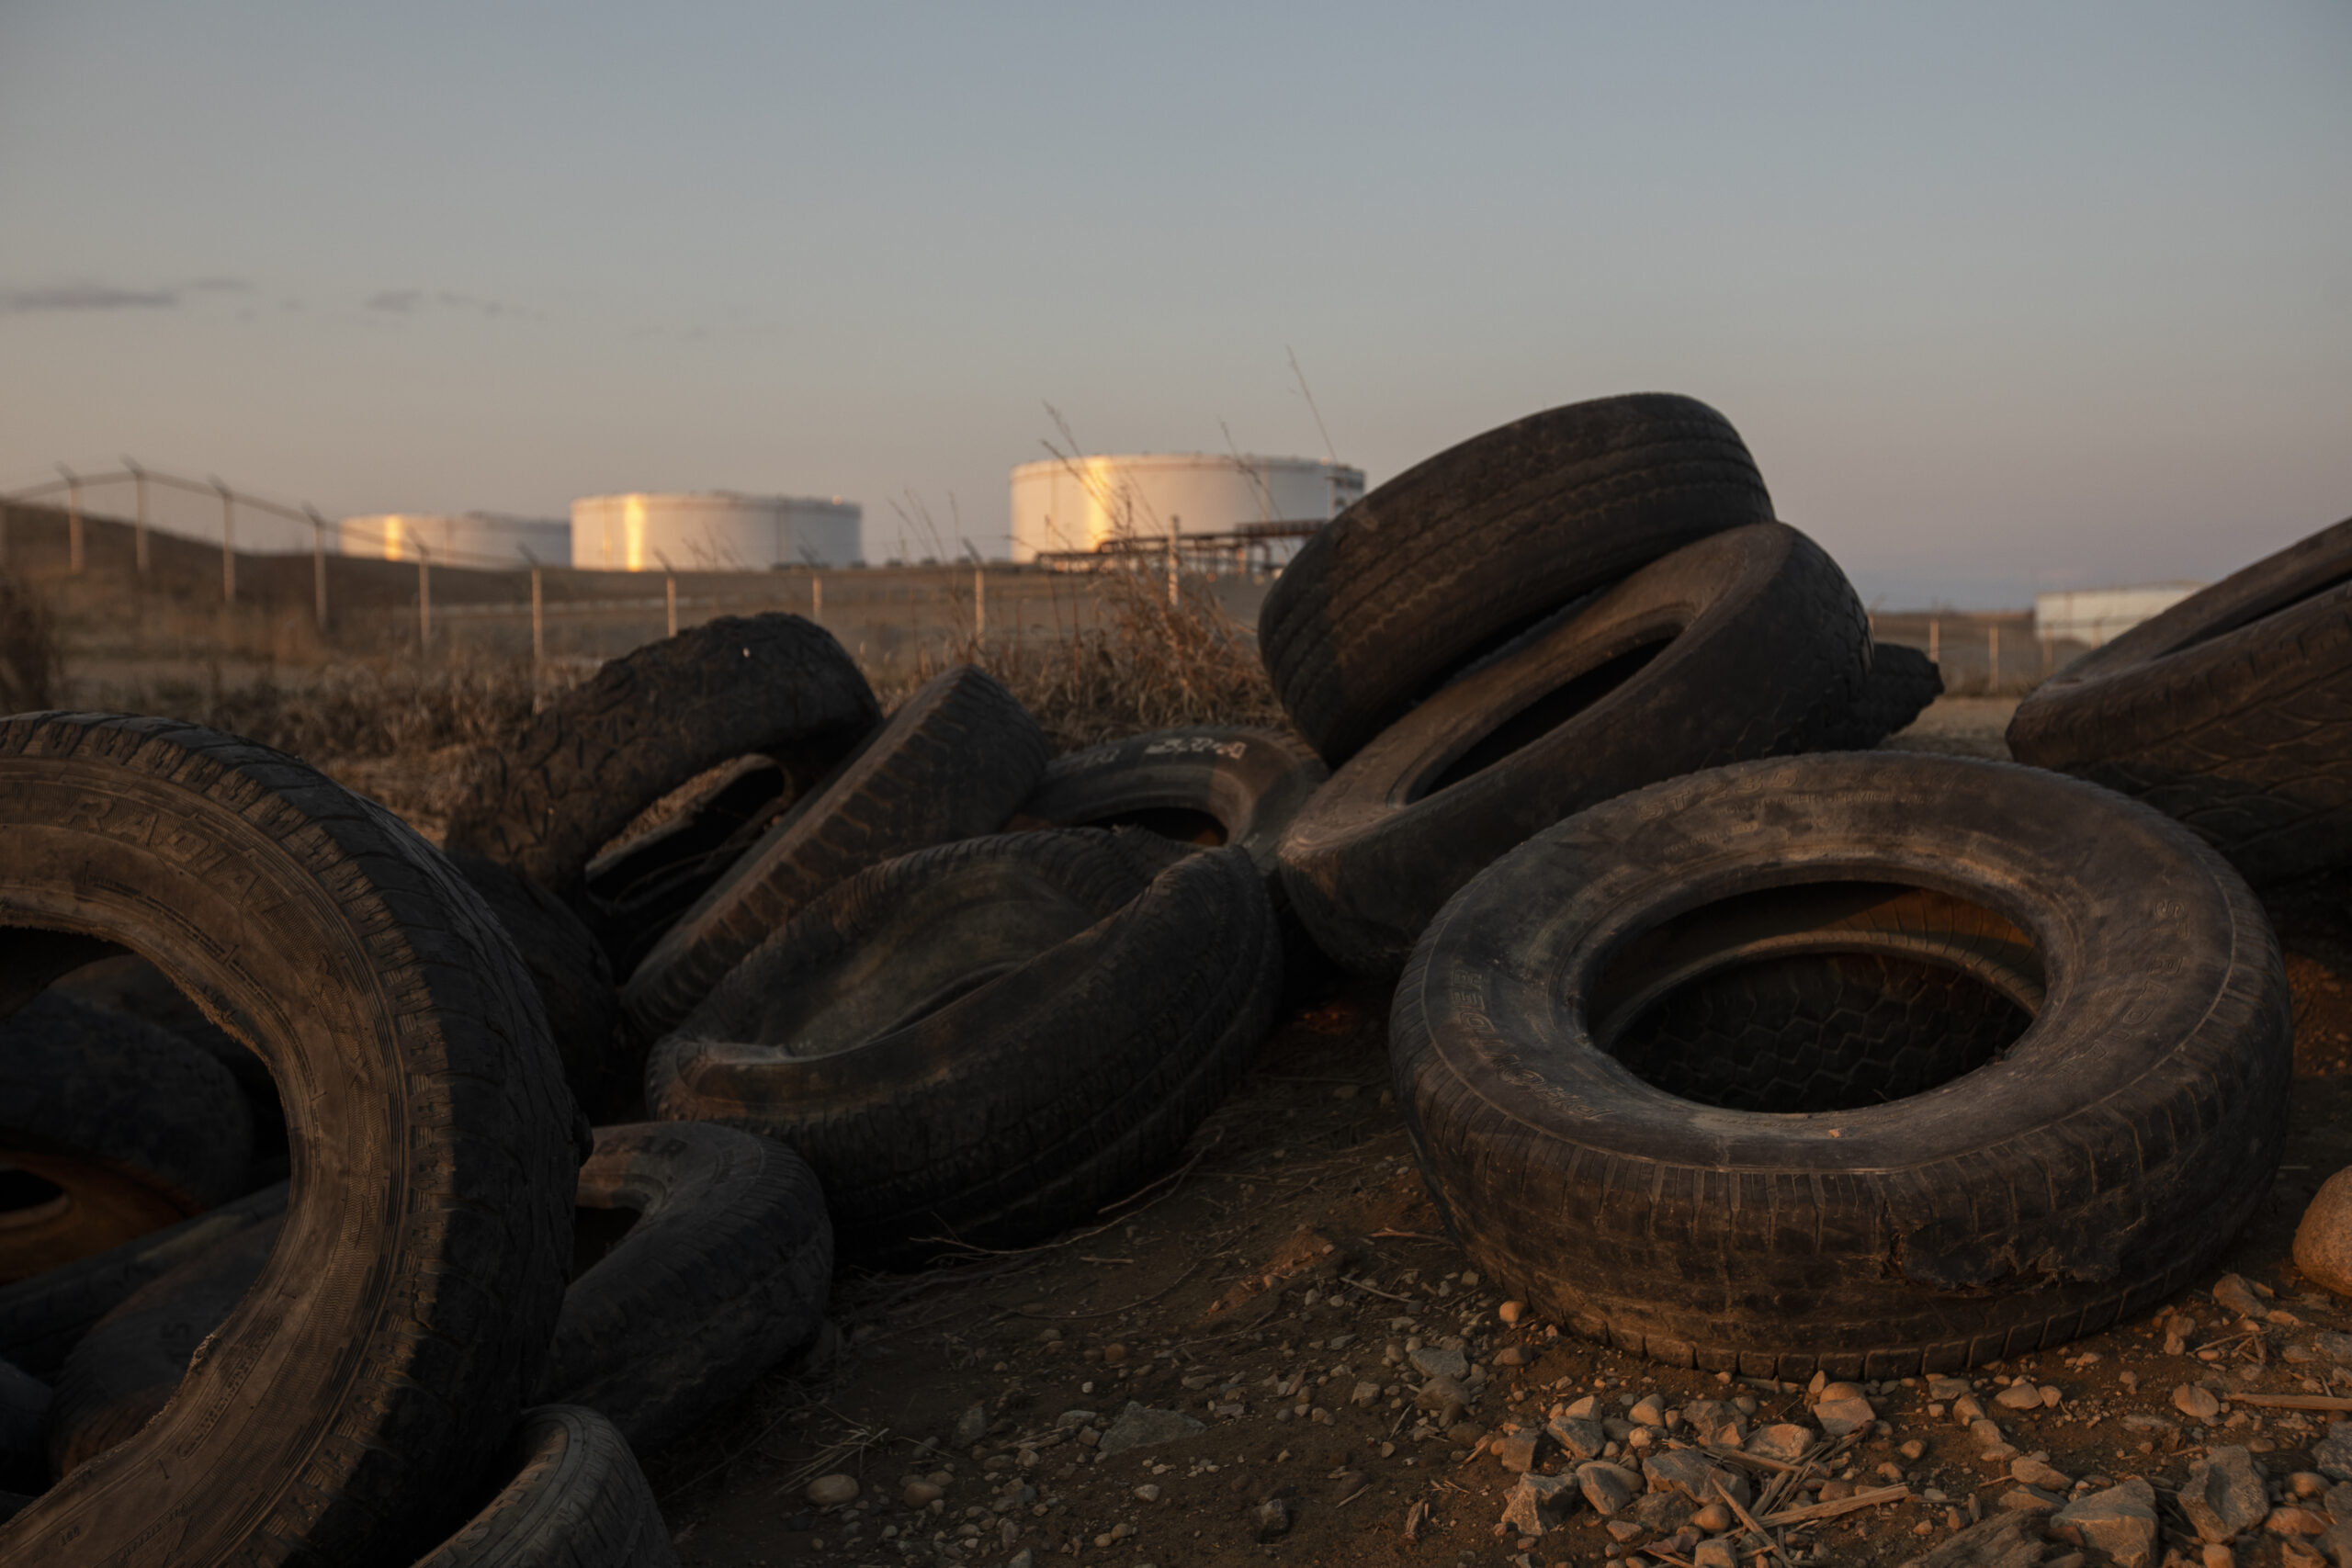 Tires in the ditch near a train crossing at the Husky Midstream North terminal near Hardisty, Alberta on April 24, 2022